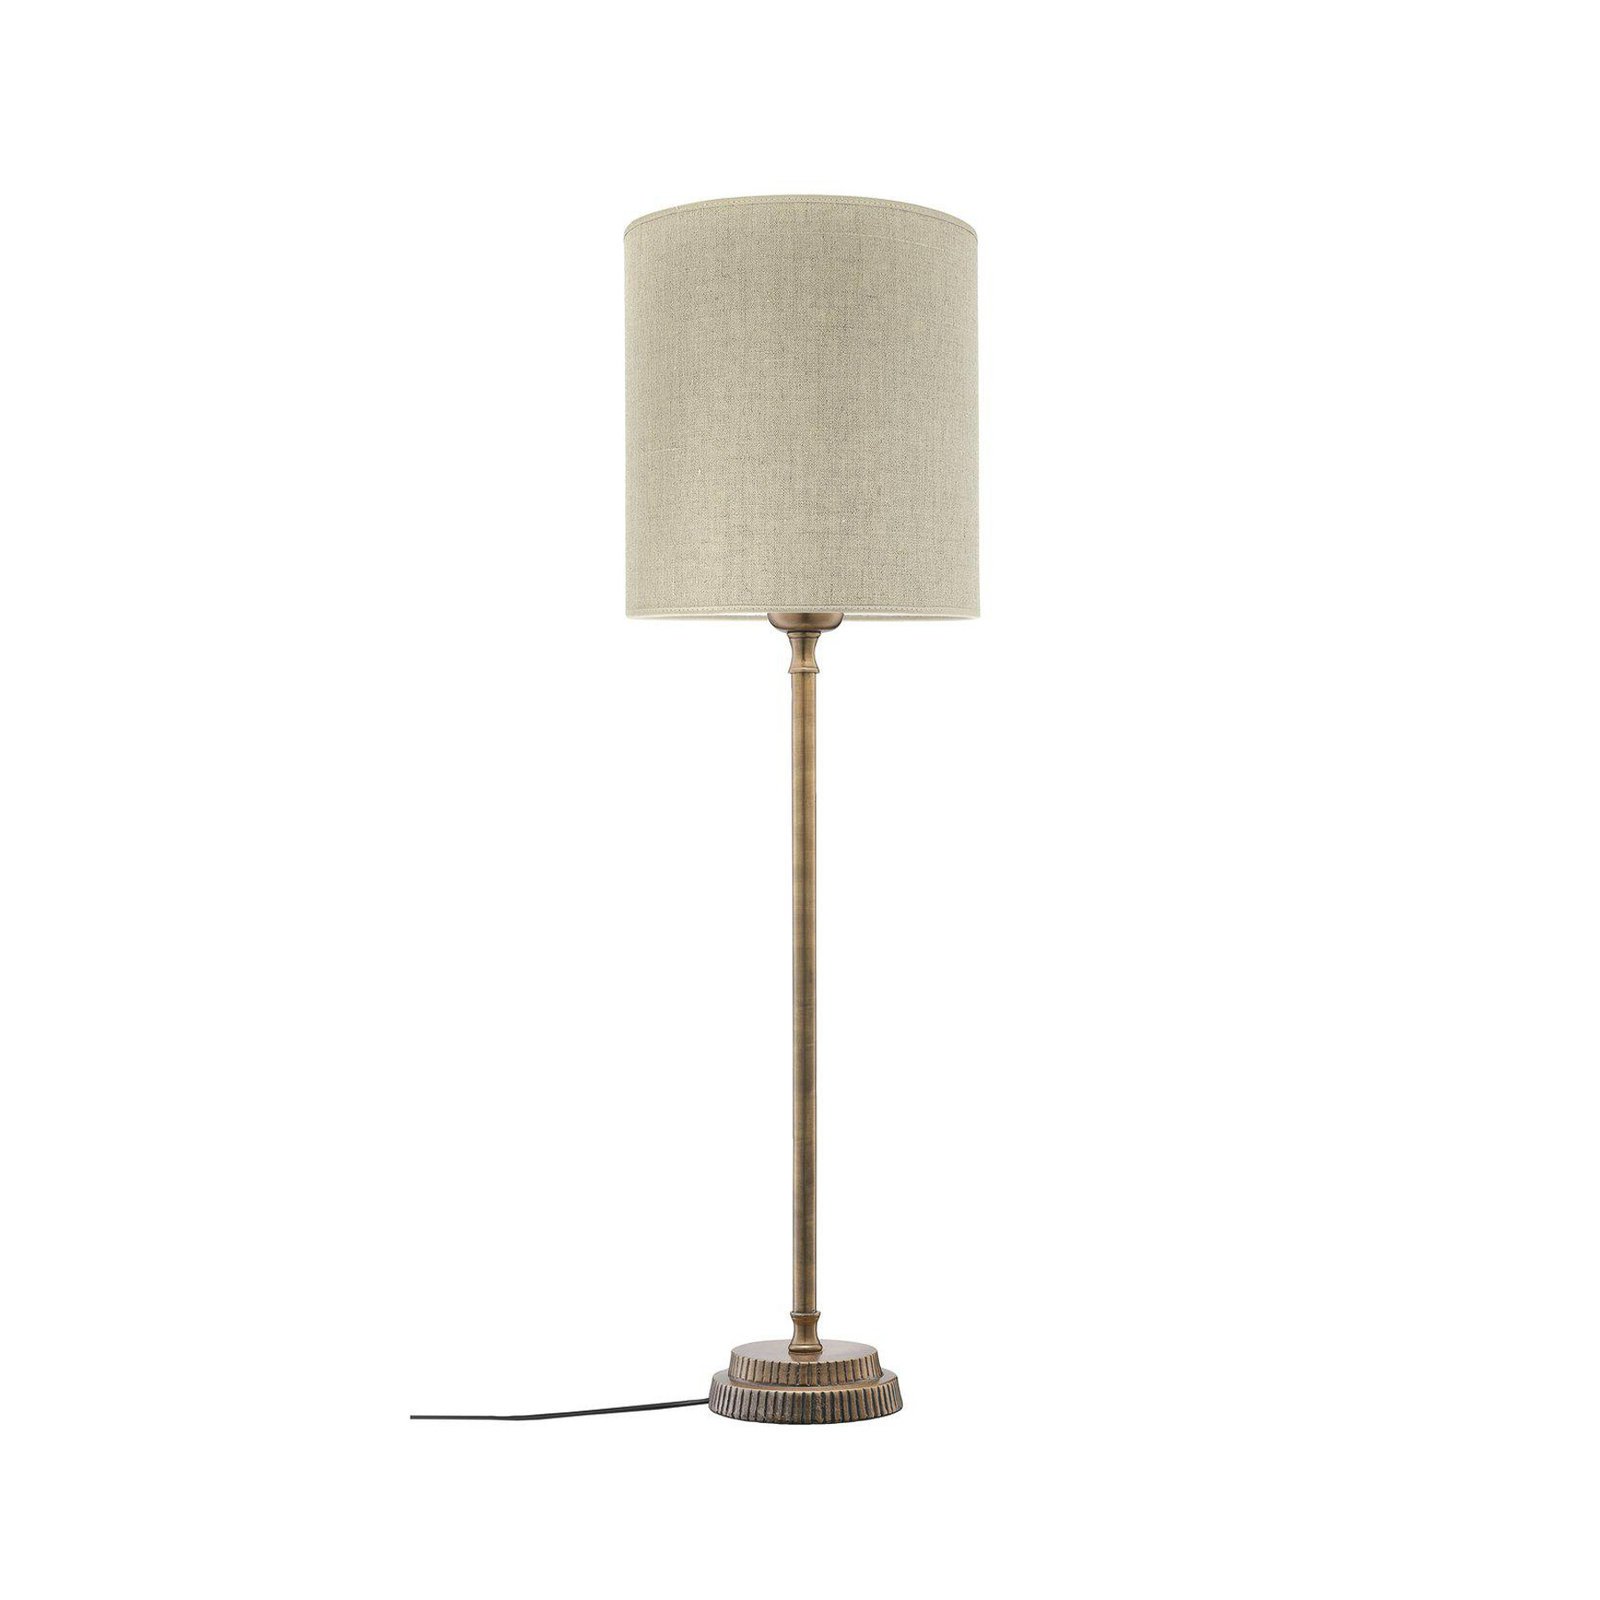 PR Home table lamp Kent beige/brass lampshade Celyn cylinder